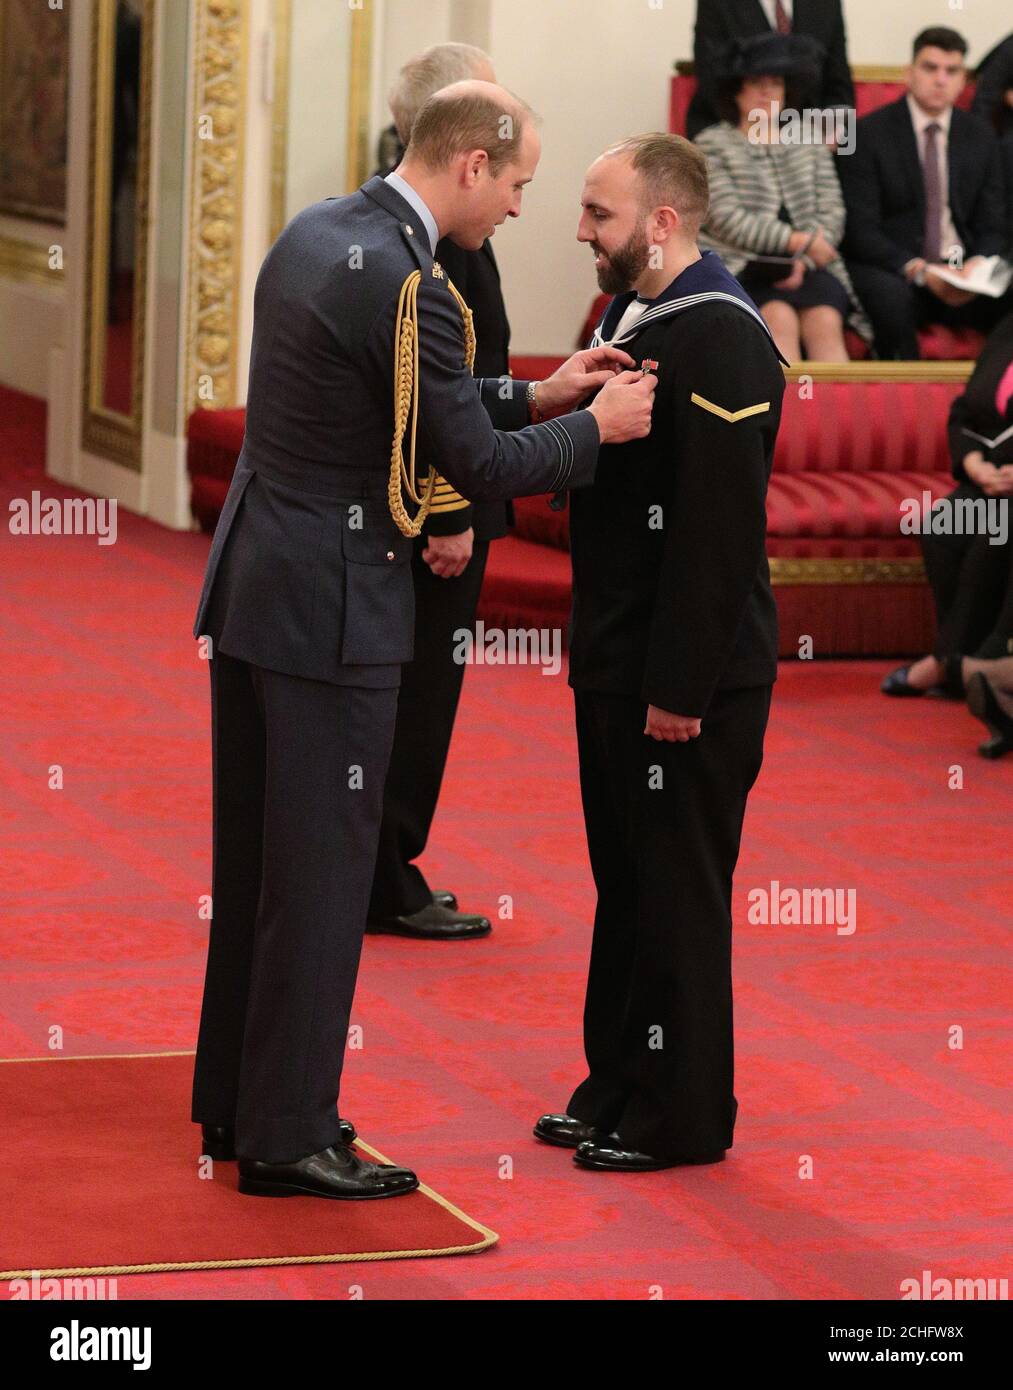 Air Engineering Technician Matthew Gallimore, Royal Navy, is made an MBE (Member of the Order of the British Empire) by the Duke of Cambridge at Buckingham Palace. Later, after the Investiture ceremony had concluded, Matthew proposed to his girlfriend, Adele, in the palace's Quadrangle. Stock Photo